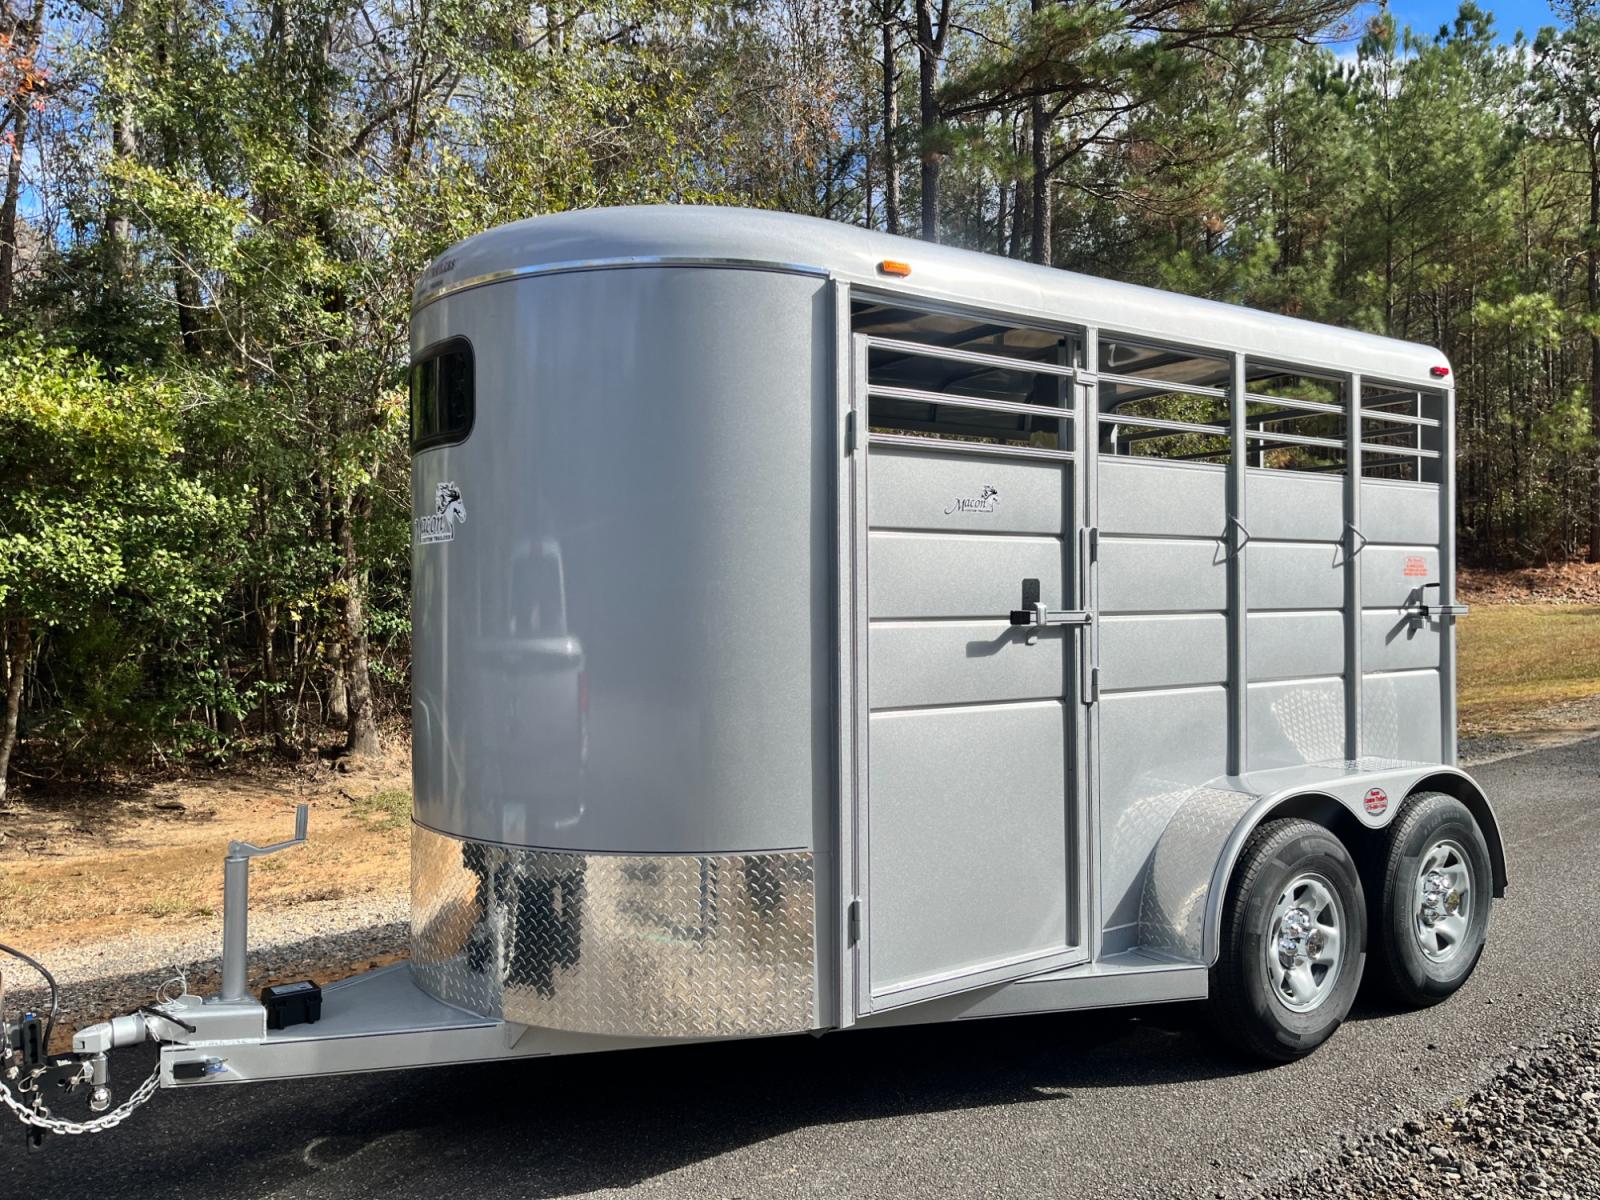 2023 Silver Metallic Calico 2 Horse Slant , located at 1330 Rainey Rd., Macon, 31220, (478) 960-1044, 32.845638, -83.778687 - Brand New 2023 Model 2 Horse Slant Calico Brand Trailer! 6ft Wide X 13ft Long Deluxe Model Tandem Axle Trailer! Easy Close Slant Divider Latch! 16" Radials! Beautiful Silver Metallic Paint is Awesome! Black Pin Striping Looks Fantastic! Fully Caulked Inside and Out to Prevent Rust! The Paint i - Photo #0